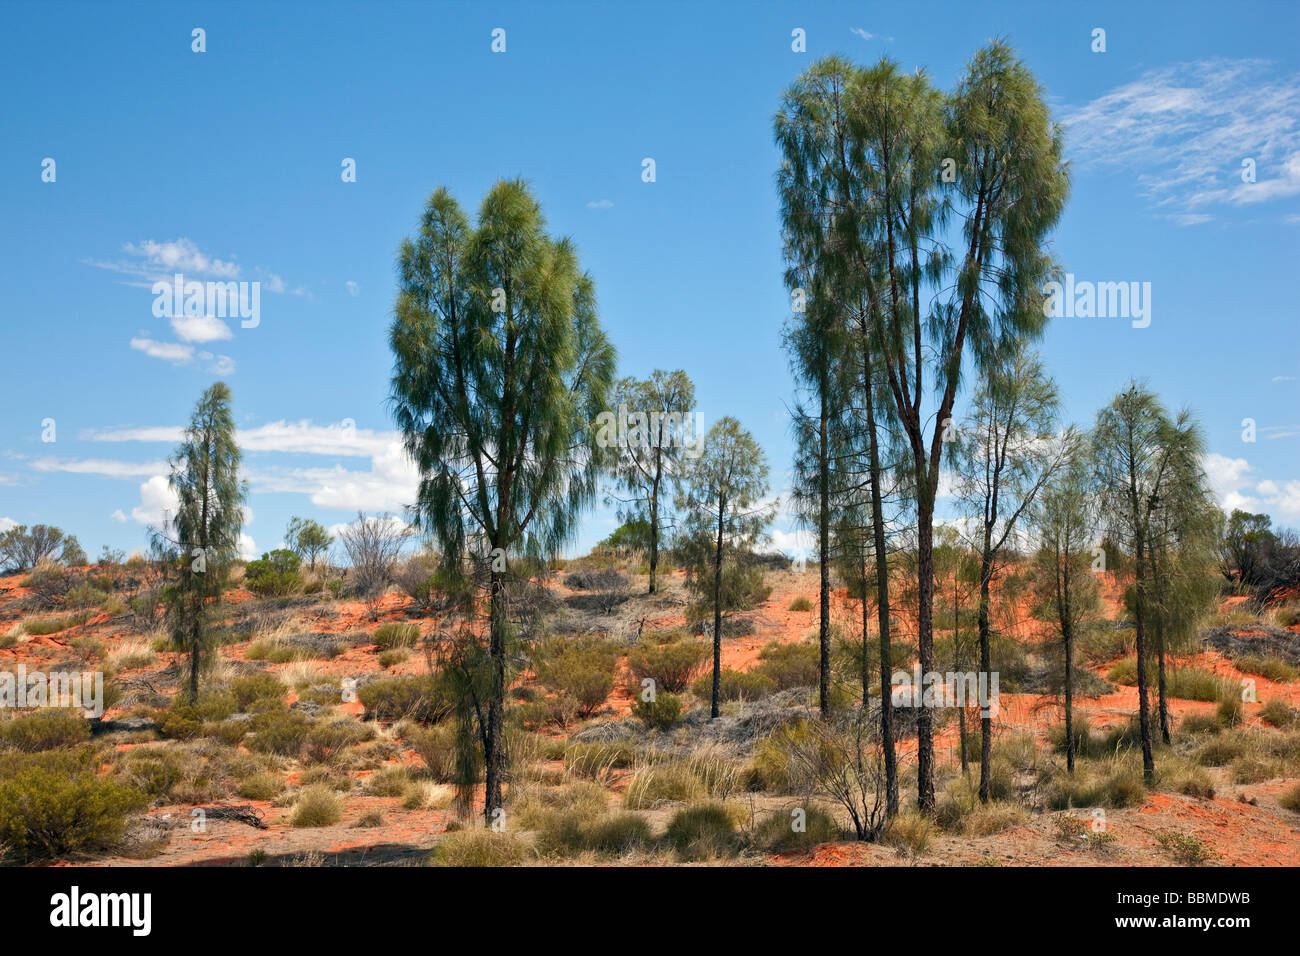 Australia, Northern Territory. A stand of desert oaks (a member of the Casuarina family) in semi-arid country near Ayres Rock. Stock Photo